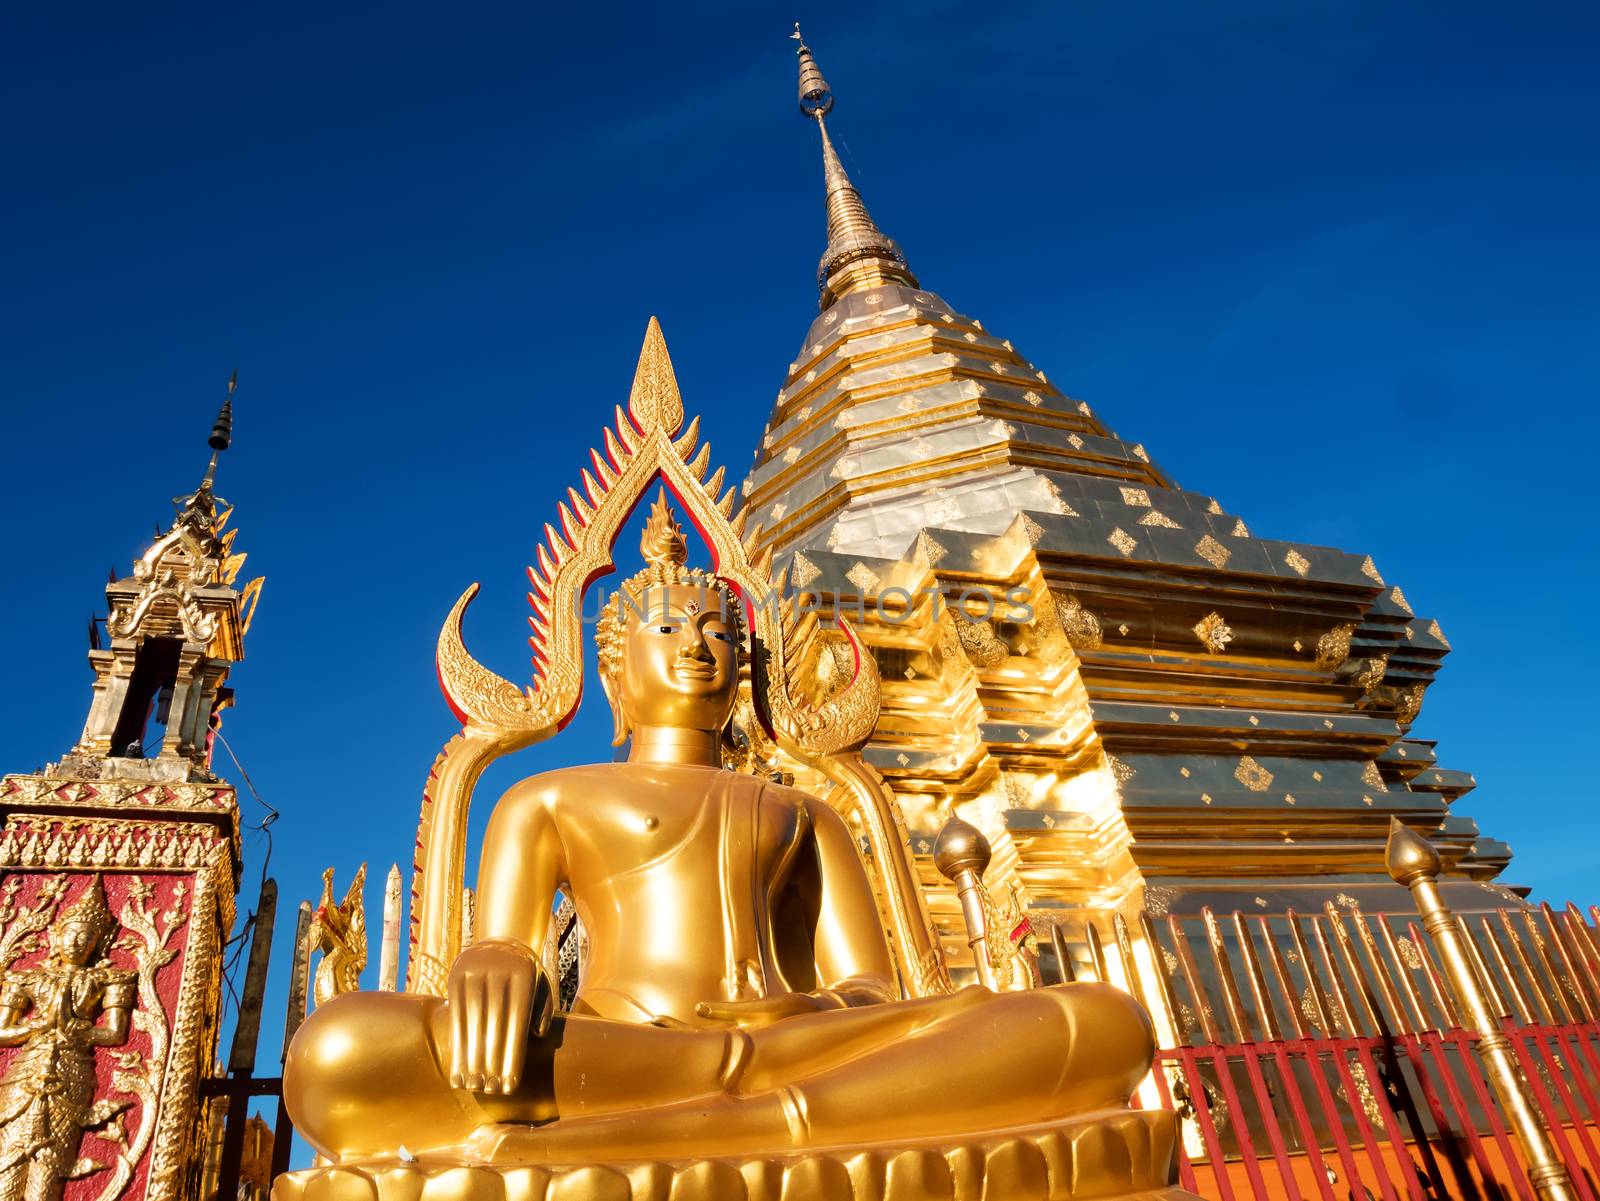 Wat Phra That Doi Suthep is tourist attraction of Chiang Mai, Thailand. by asiandelight